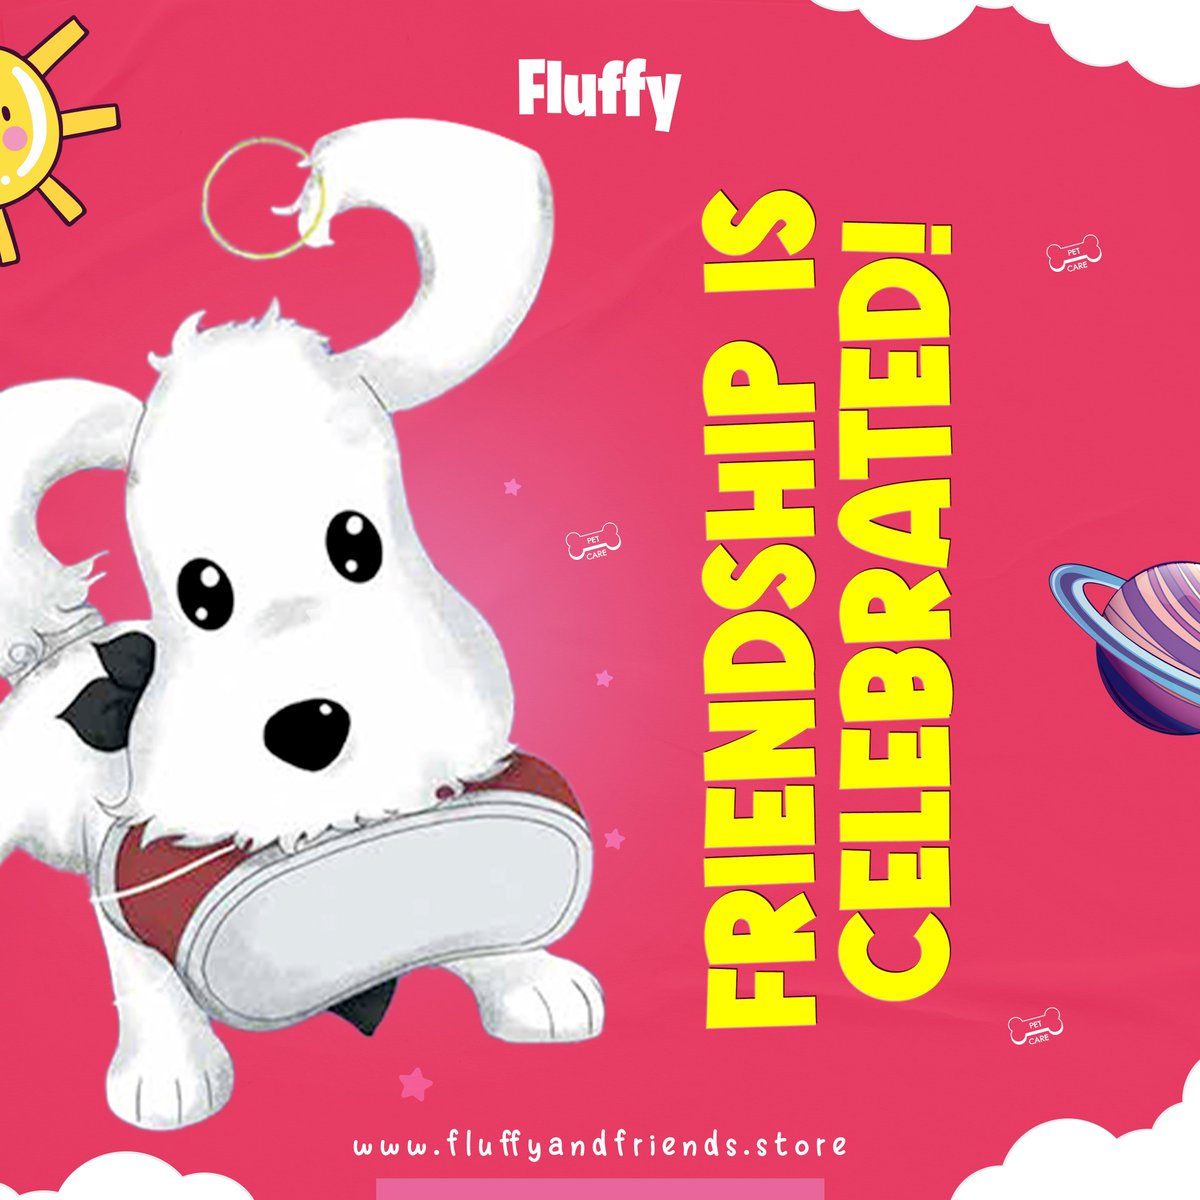 Where love and friendship fill the pages! Step into Fluffy's heartwarming adventure today! fluffyandfriends.store #Fluffy #ThomasStevens #FluffyAndFriends #ShamelessSelfpromoMonday #booktwt #writerslift